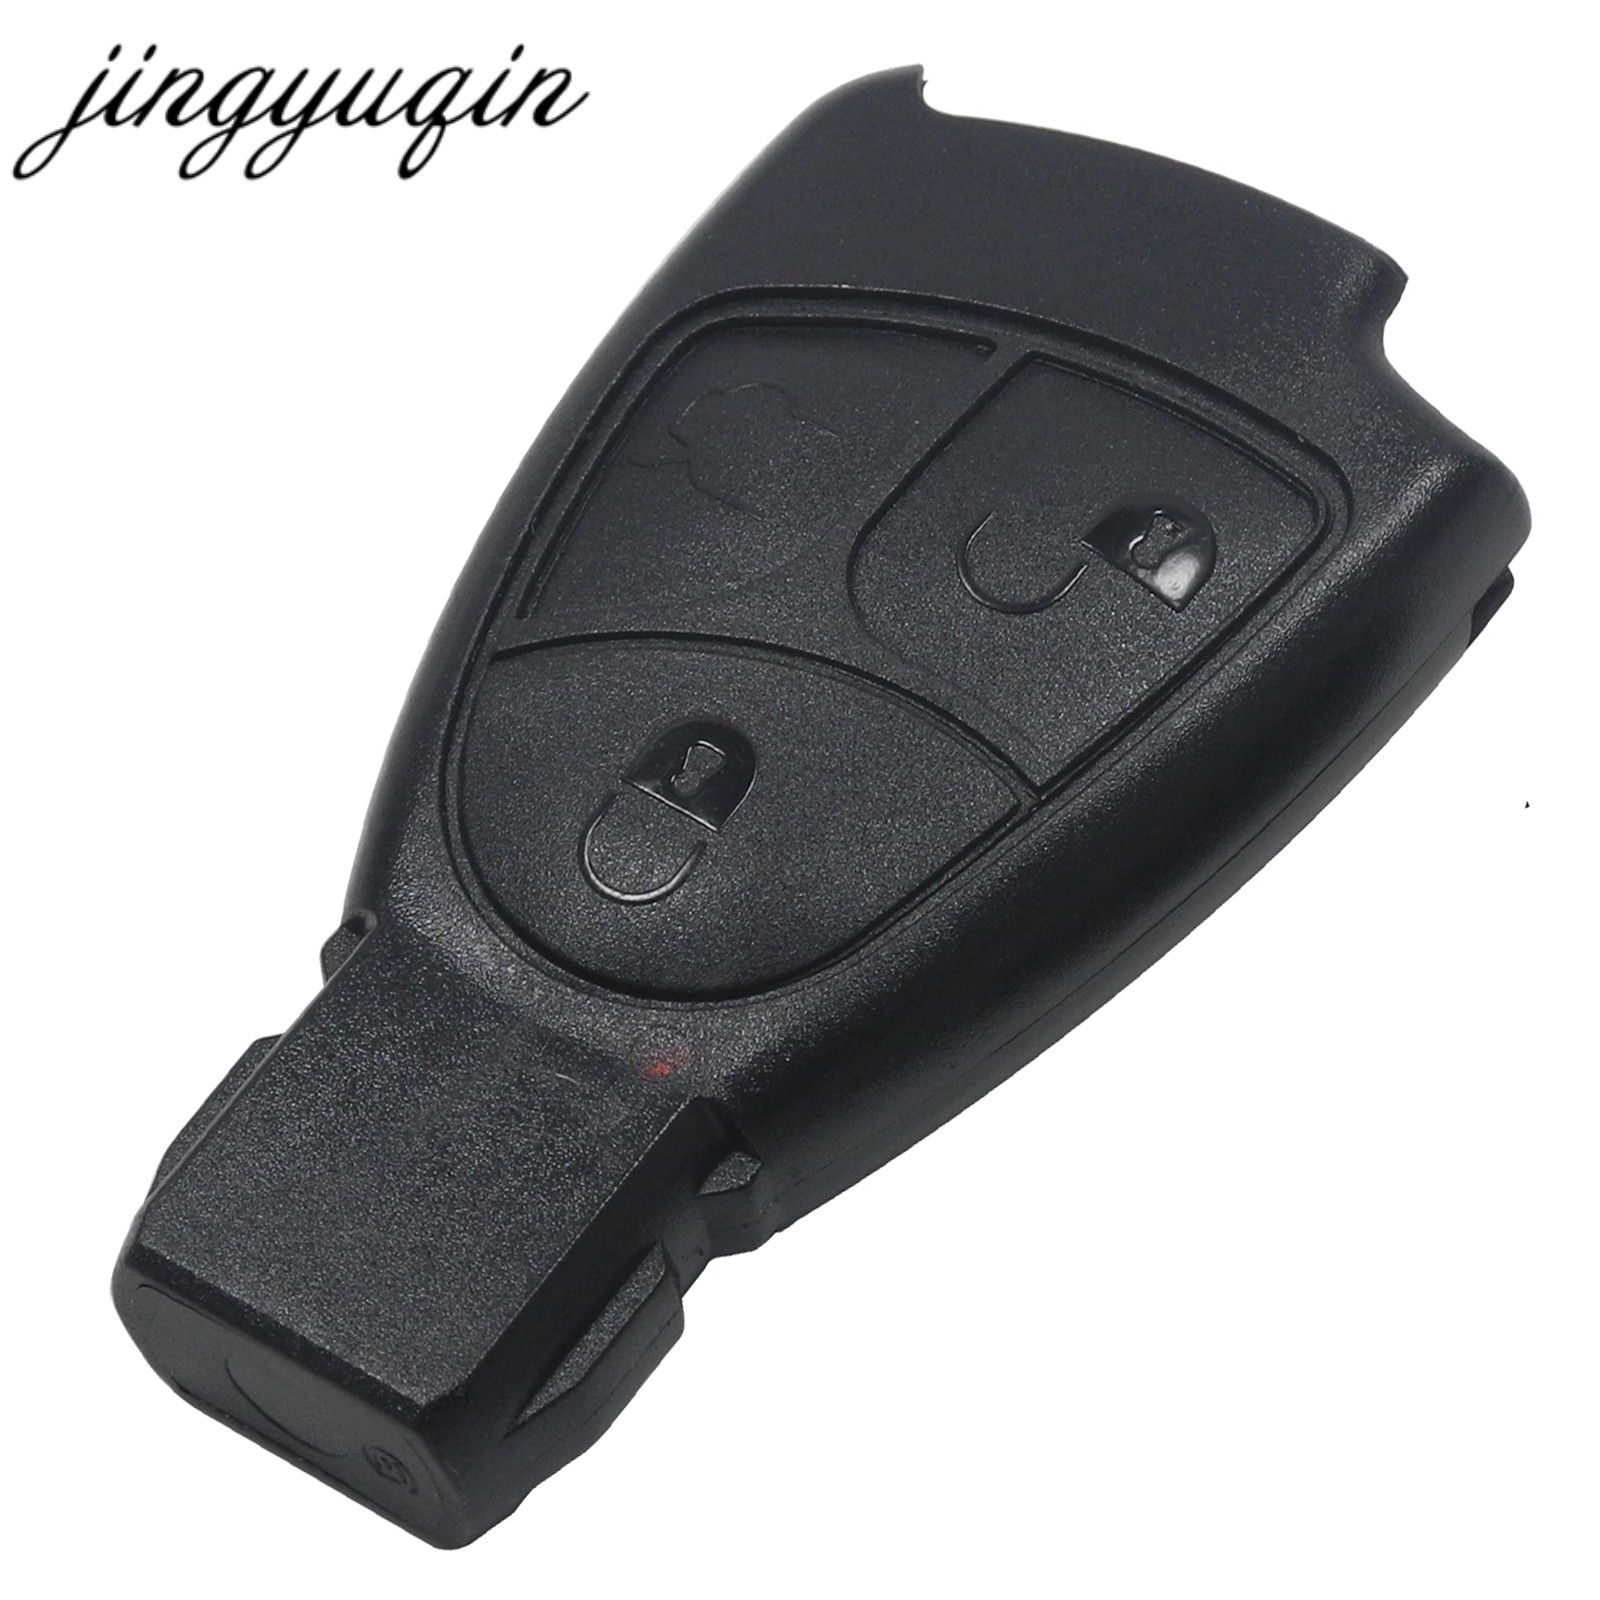 jingyuqin Replacement Fob Remote Key Fob Case Cover For Mercedes Benz B C E ML S CLK CL 3 Buttons 2B 4BT